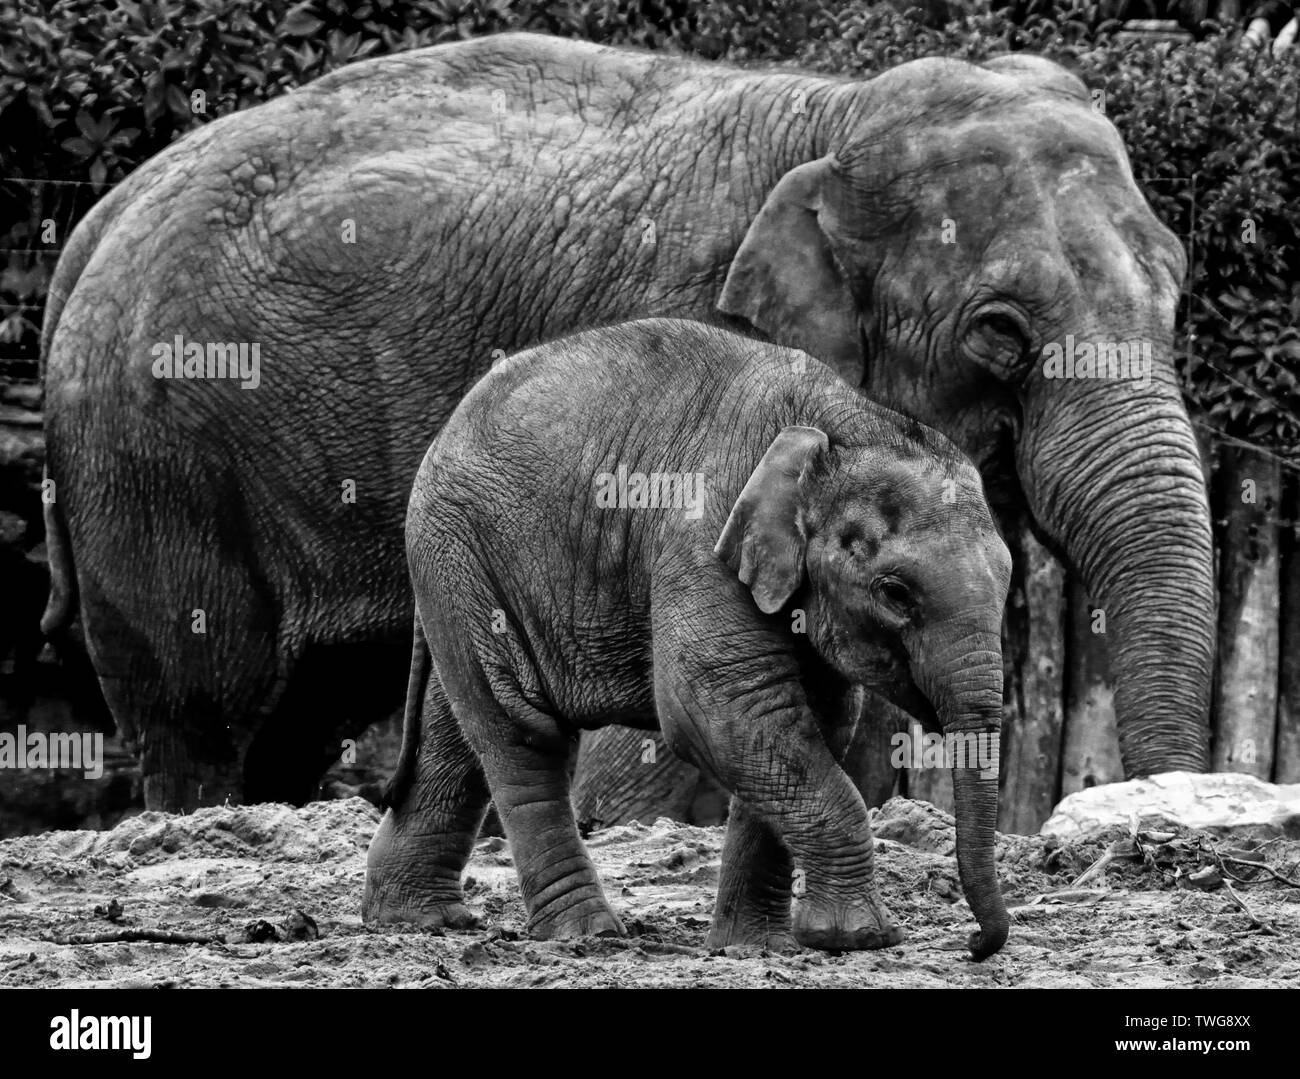 Zoo Animals and wildlife in Cheshire credit Ian Fairbrother/Alamy Stock Photos Stock Photo